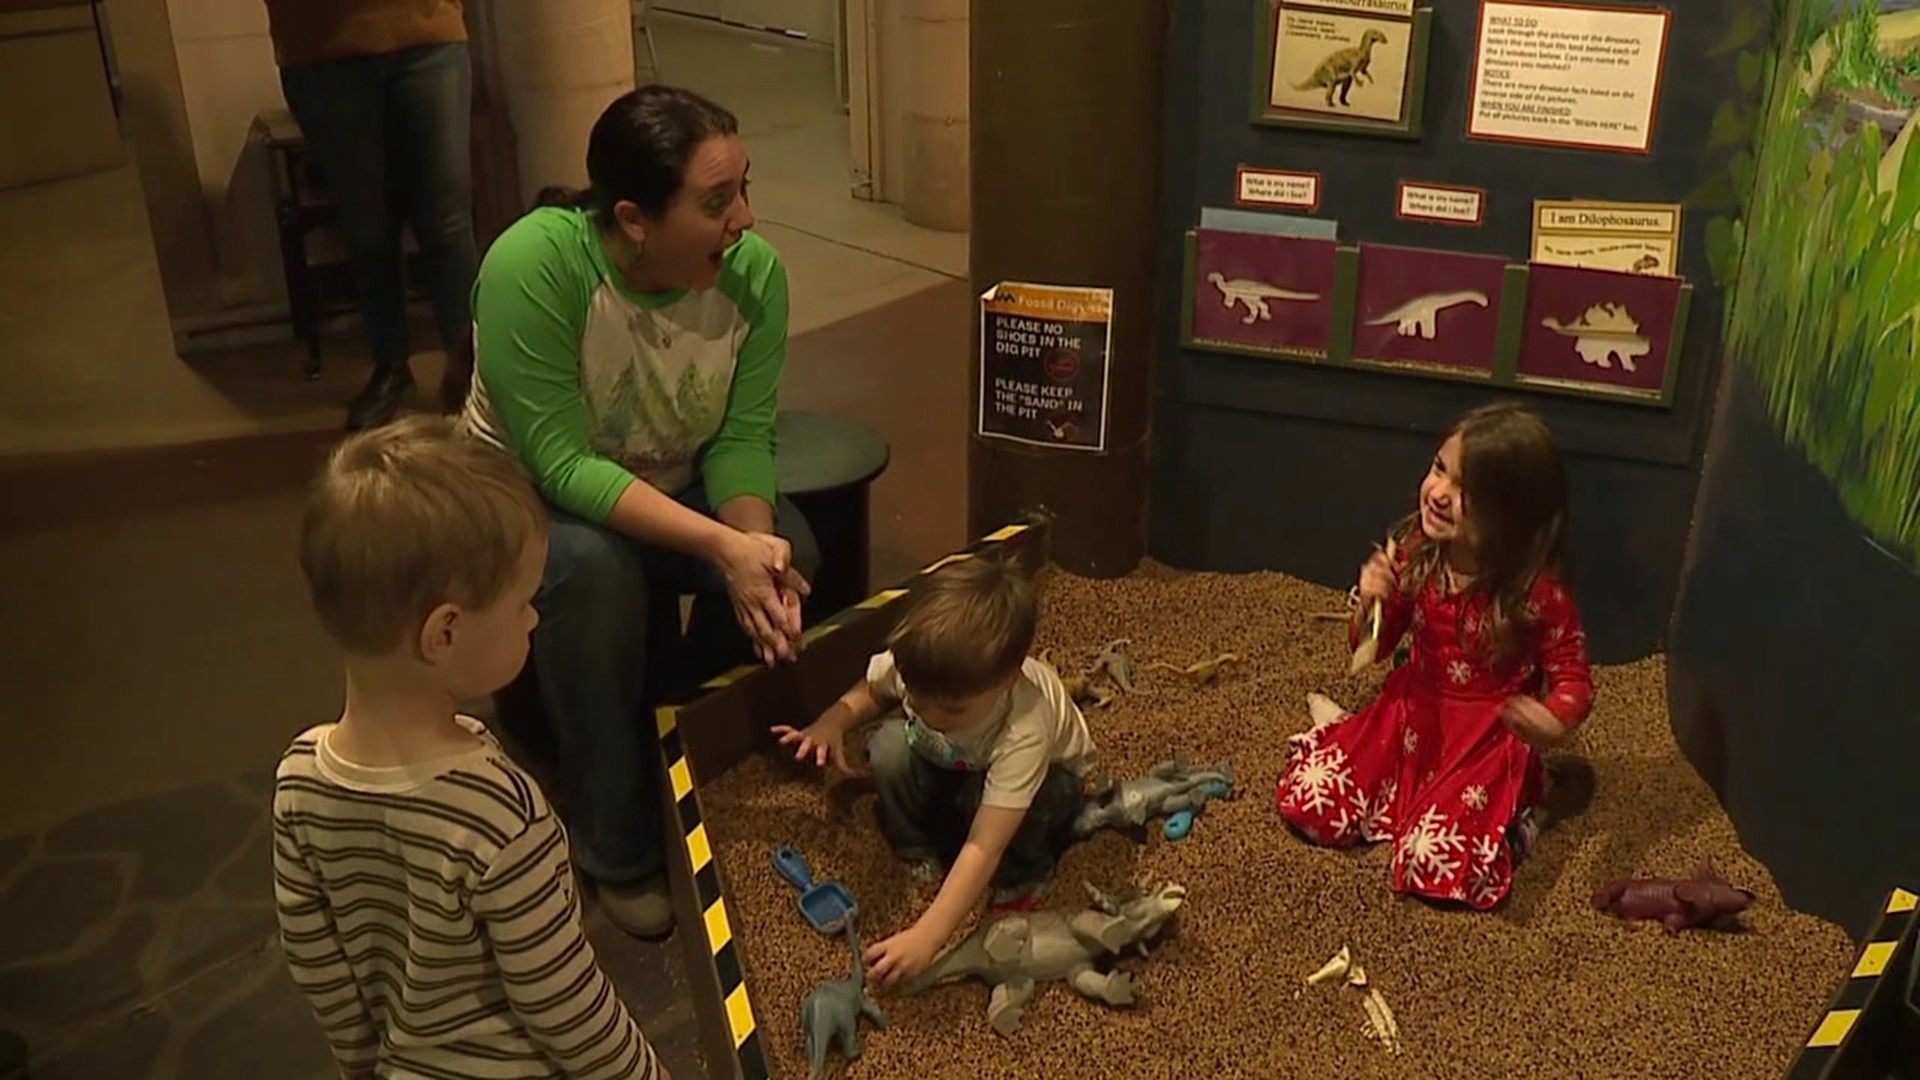 Families are finding many opportunities for fun and learning during winter break at the Bloomsburg Children's Museum.